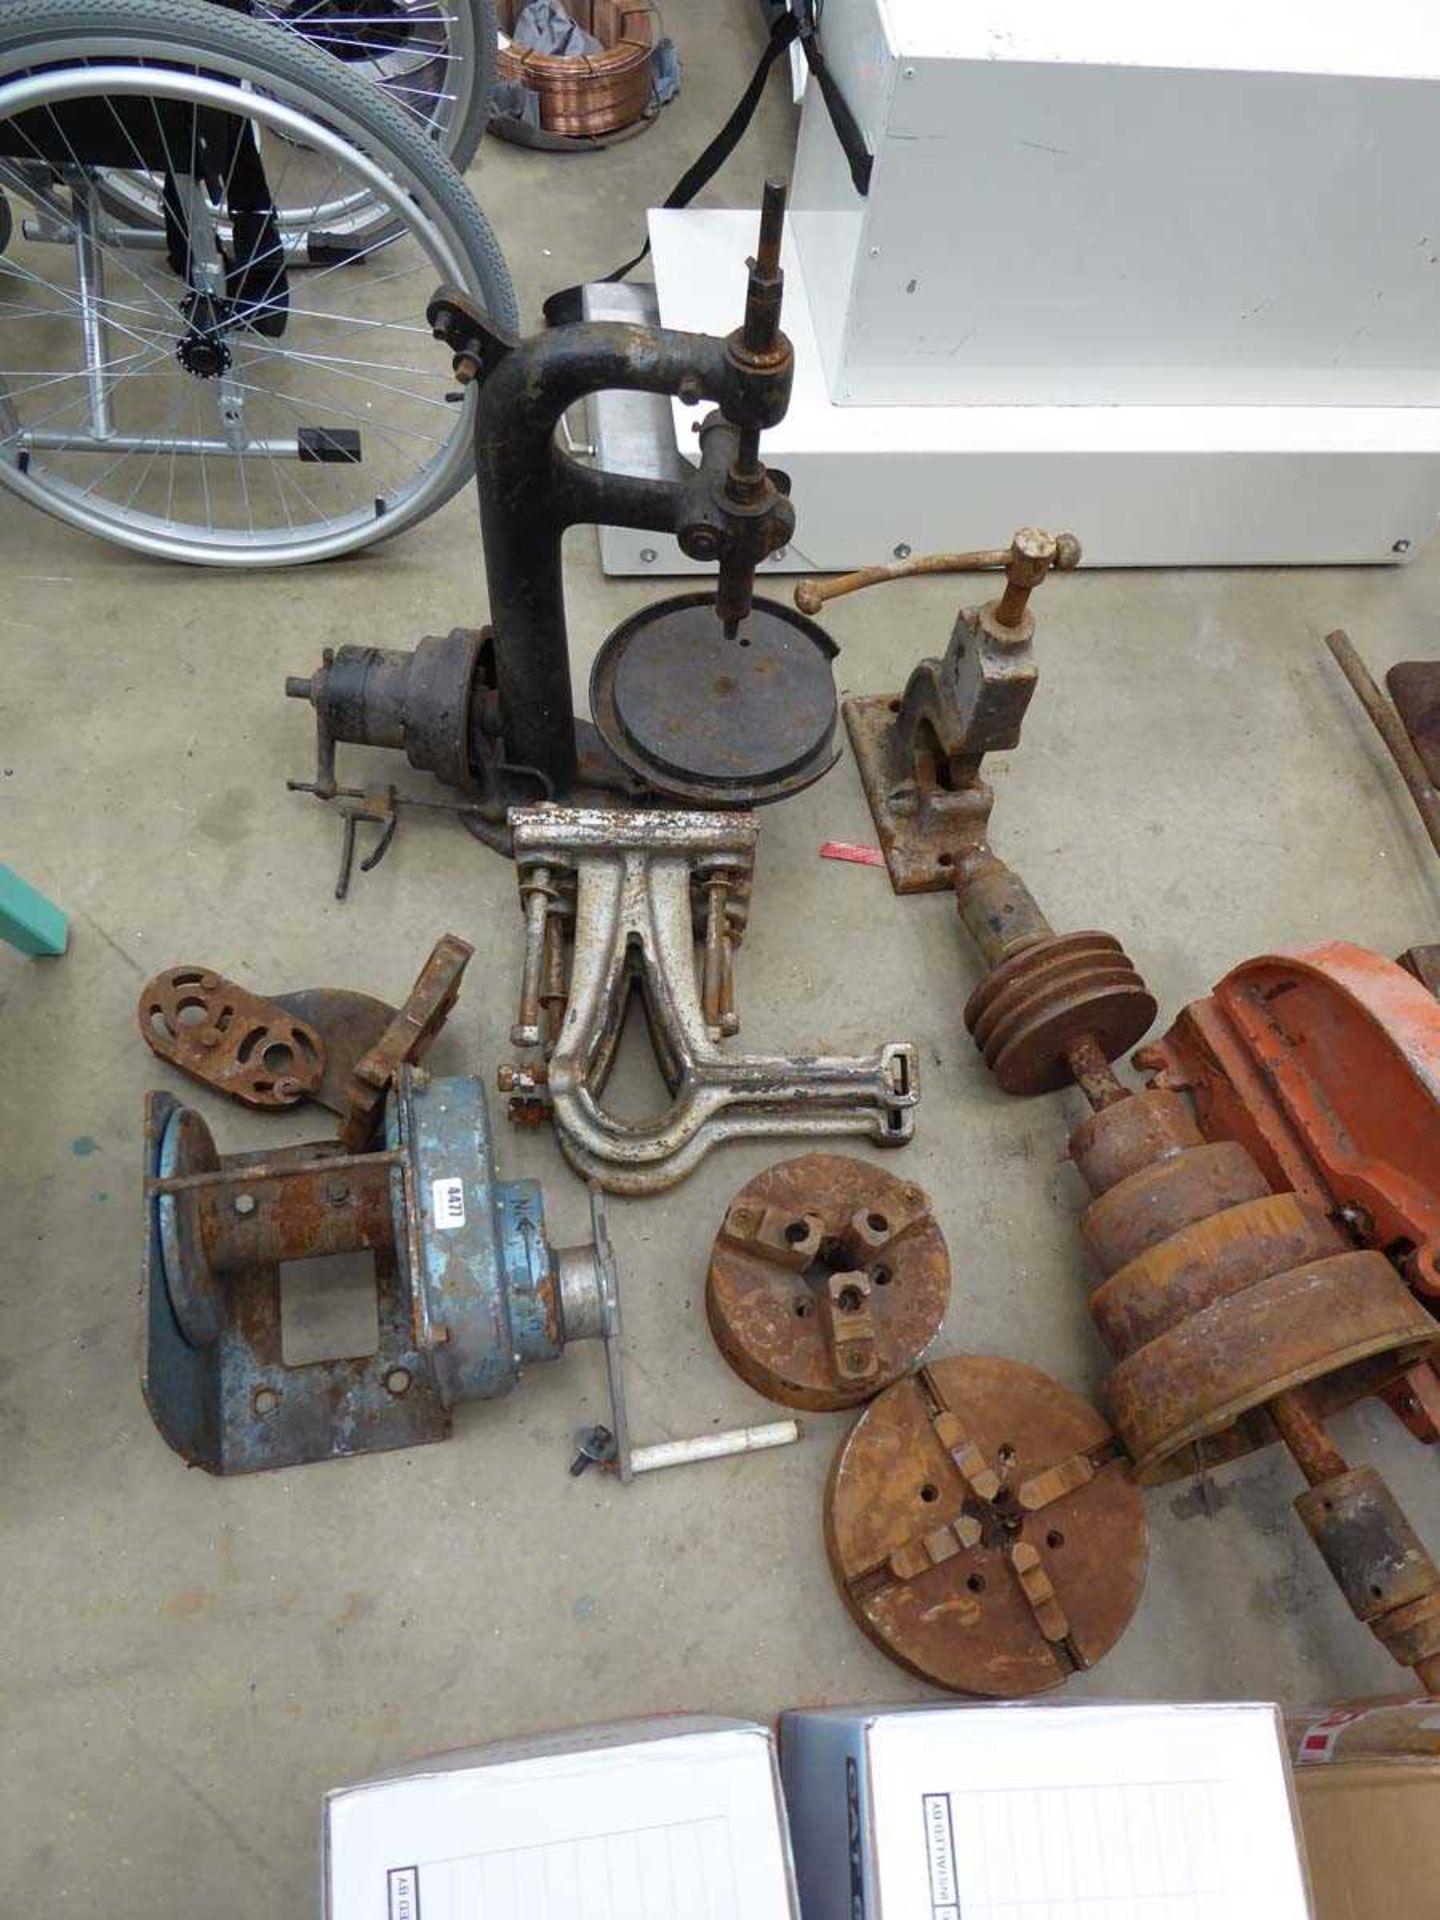 Two machine chucks, a quantity of machine parts, small press and other metal parts